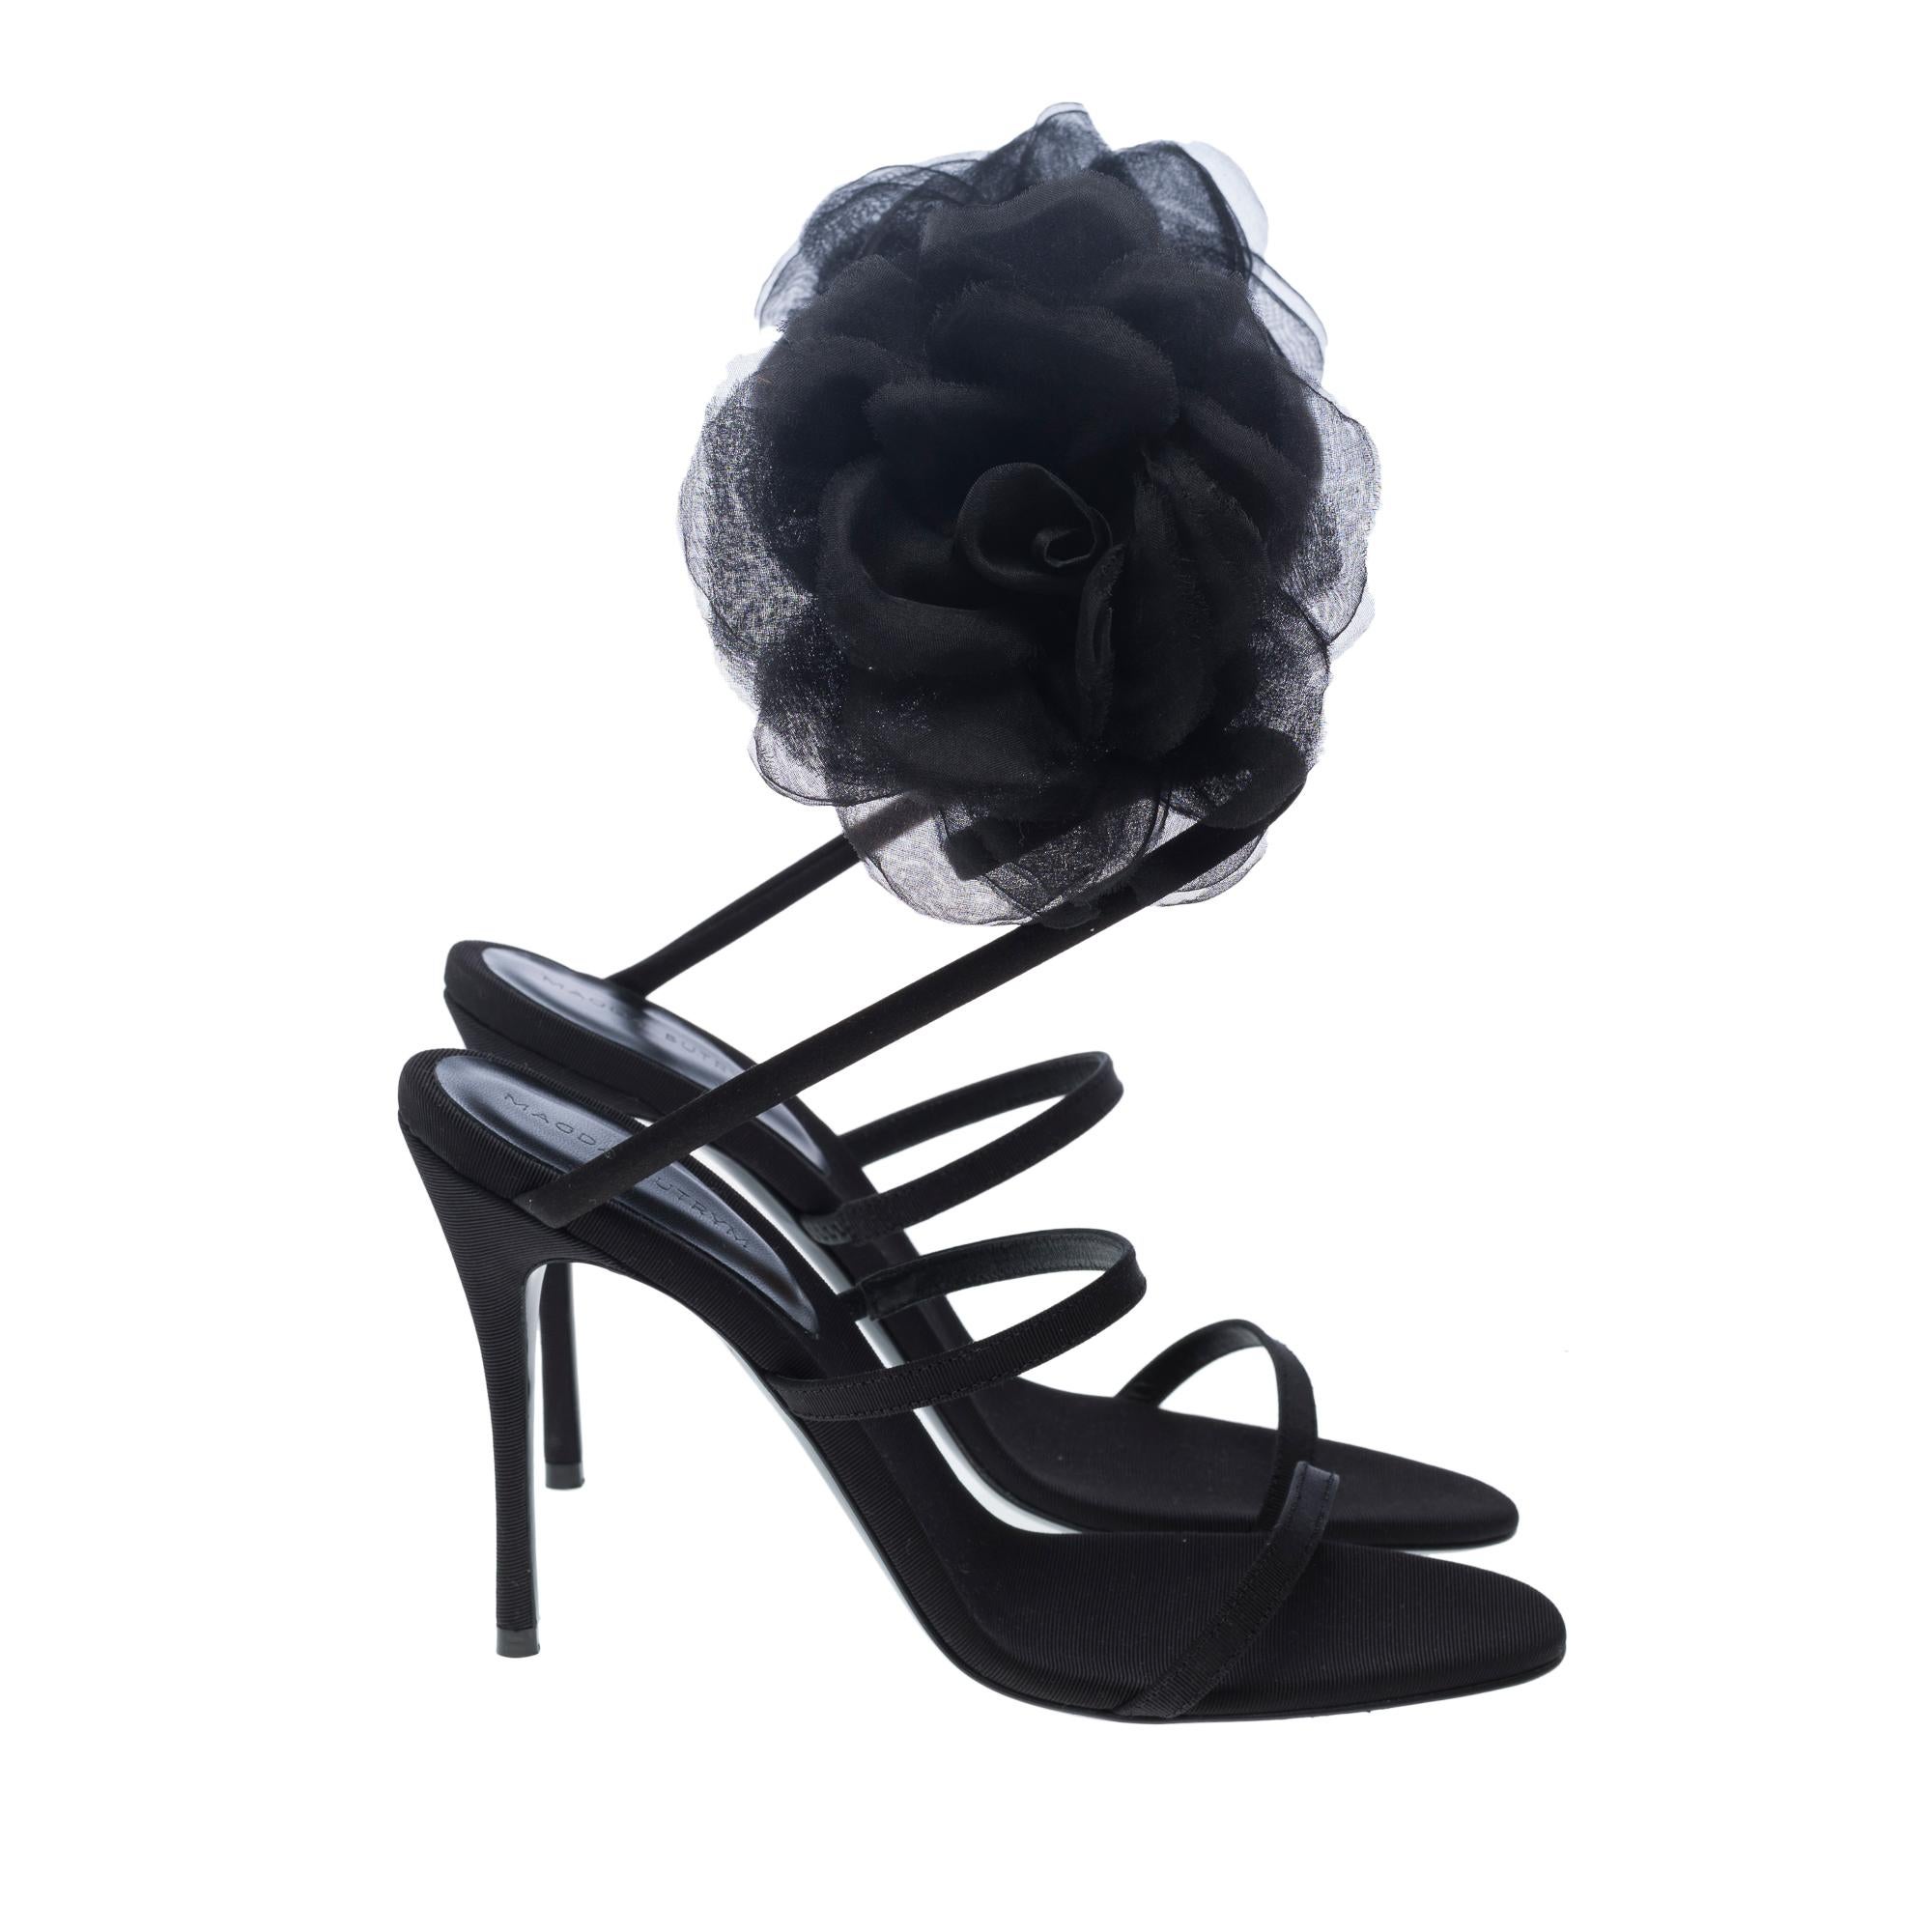 New Magda Butrym Peep Toe Mules in black satin , Size 39 For Sale 2